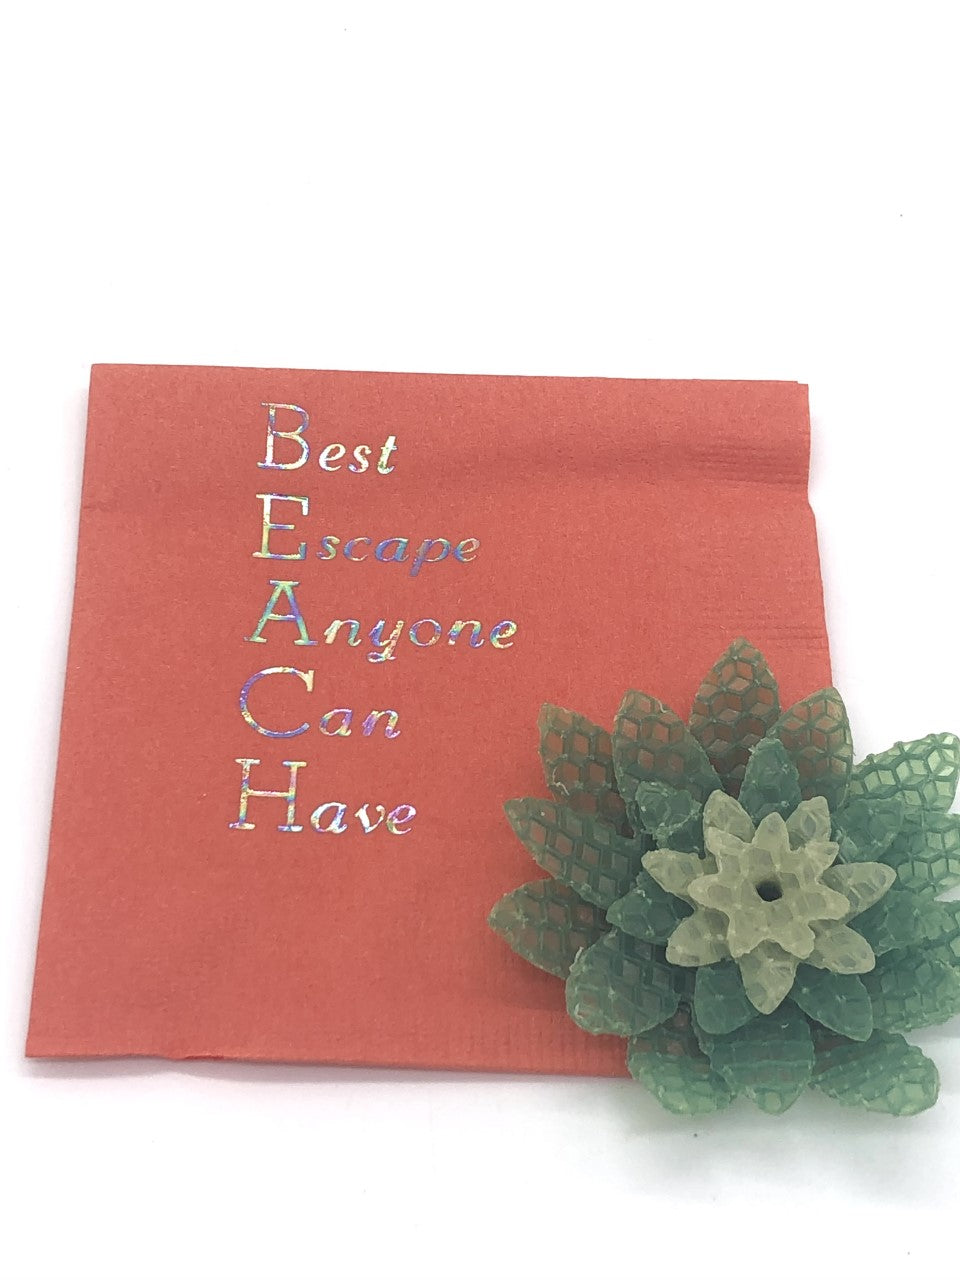 Coral cocktail napkins with iridescent Best Escape Anyone Can Have slogan. The first letter of each word spells the word BEACH vertically